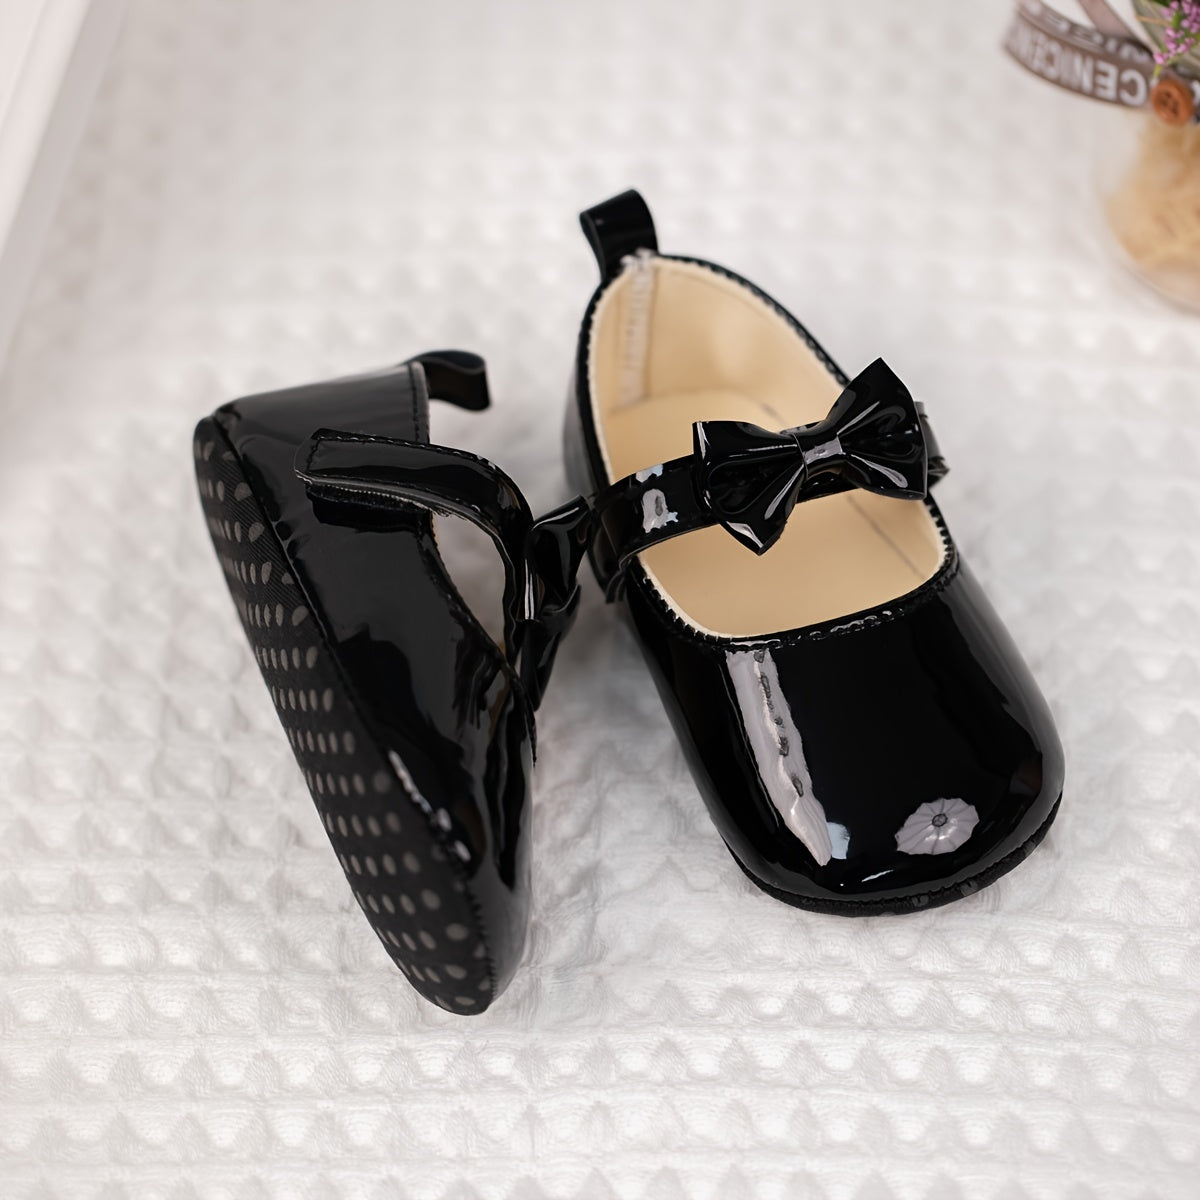 Baby Soft-soled Mary Jane Shoes with Bow Decor